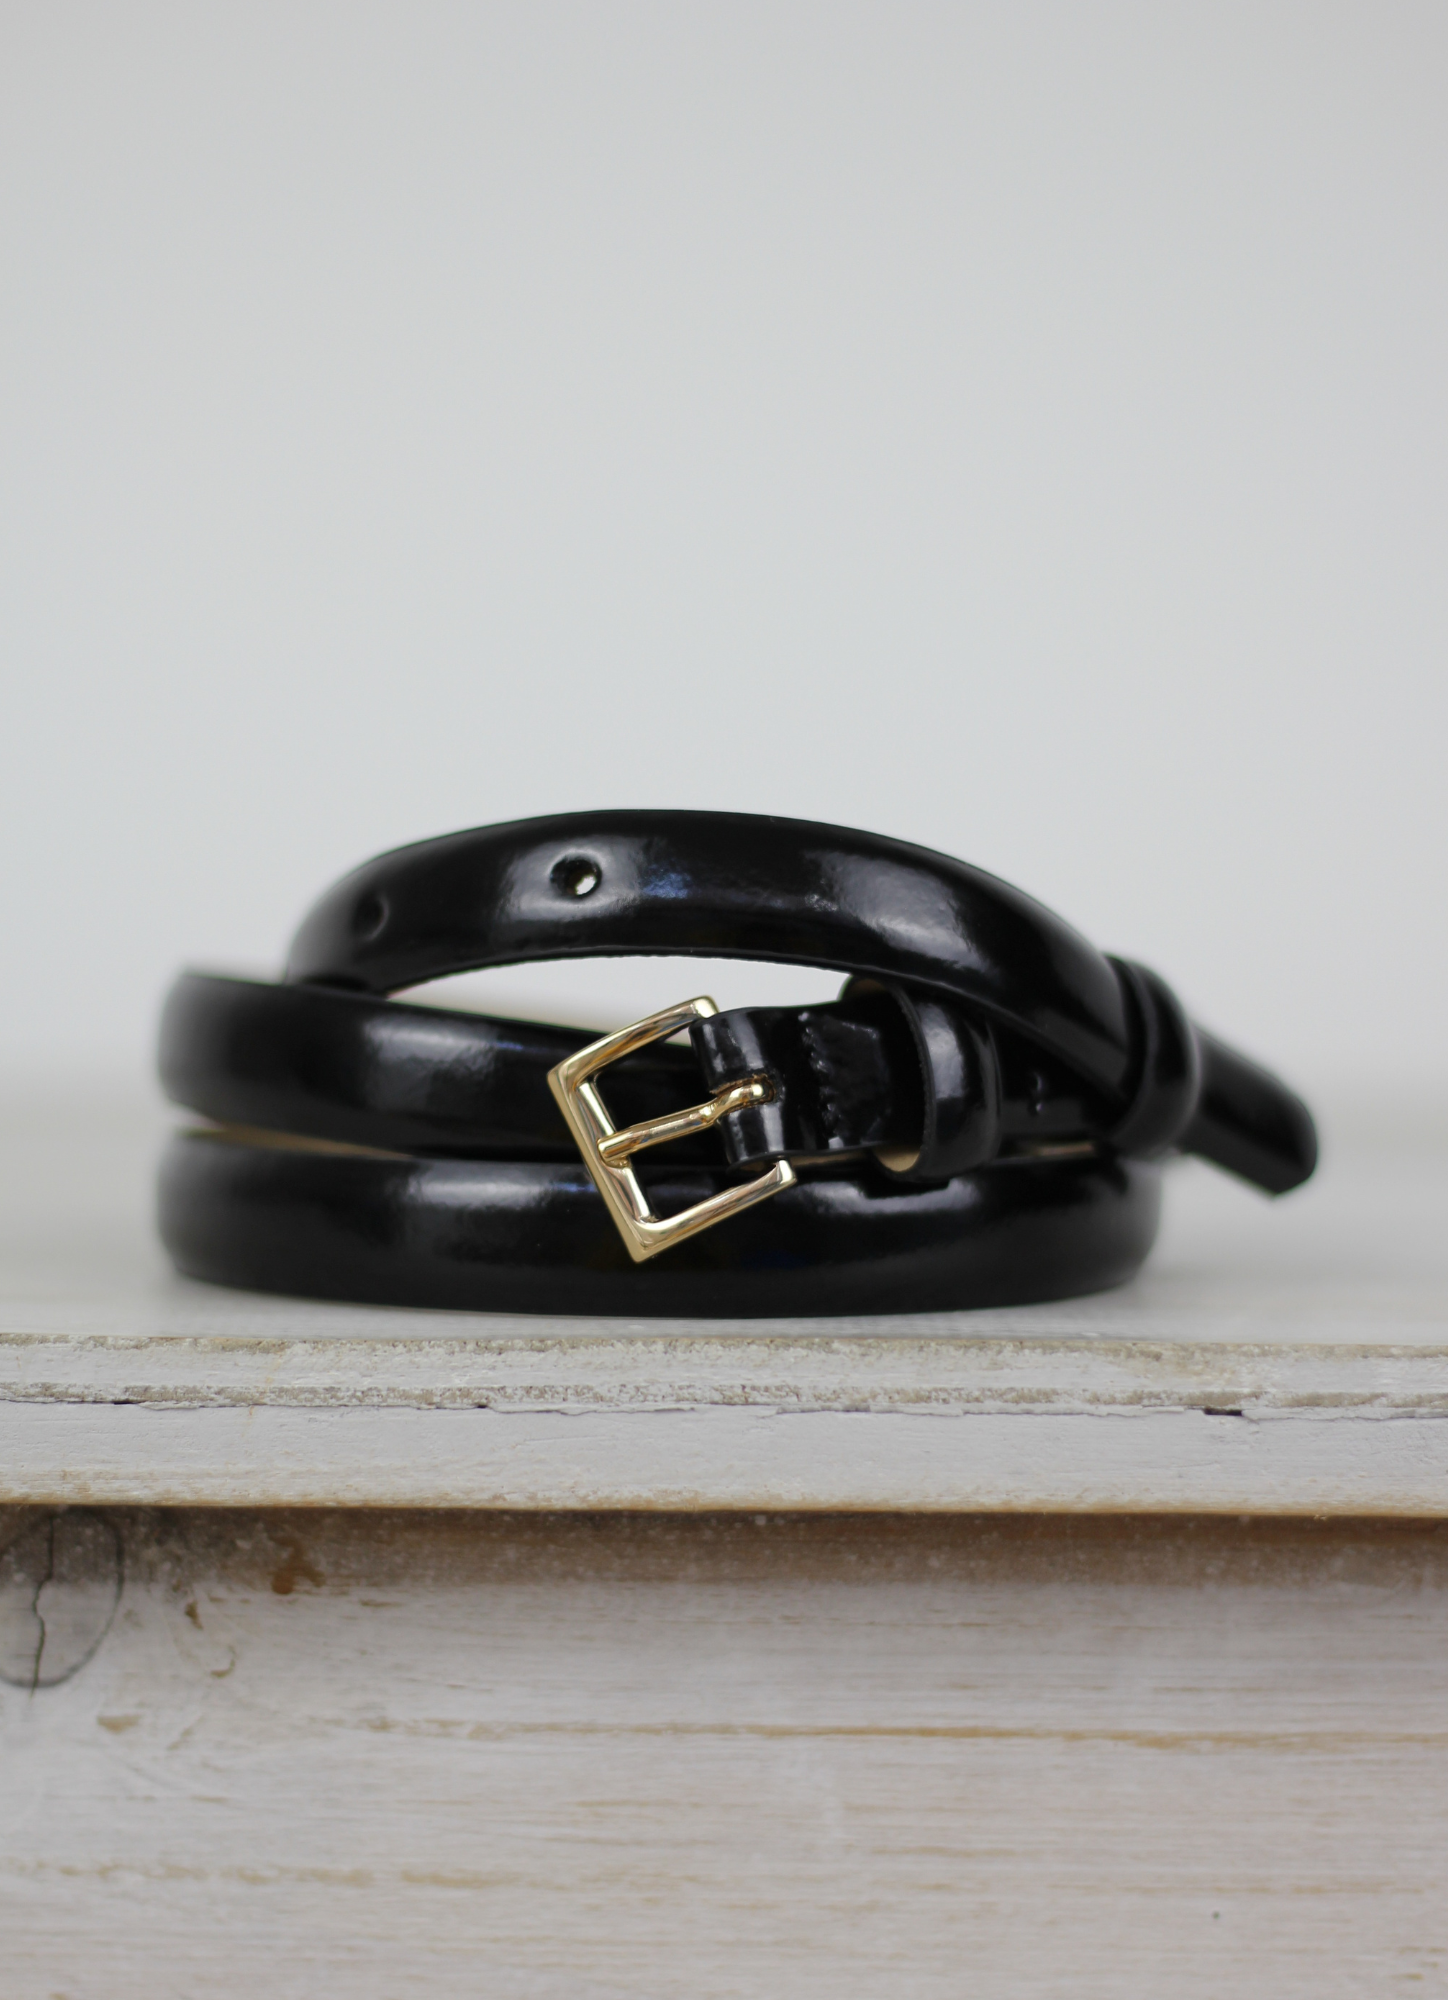 Abro narrow leather belt patent black leather gold buckle